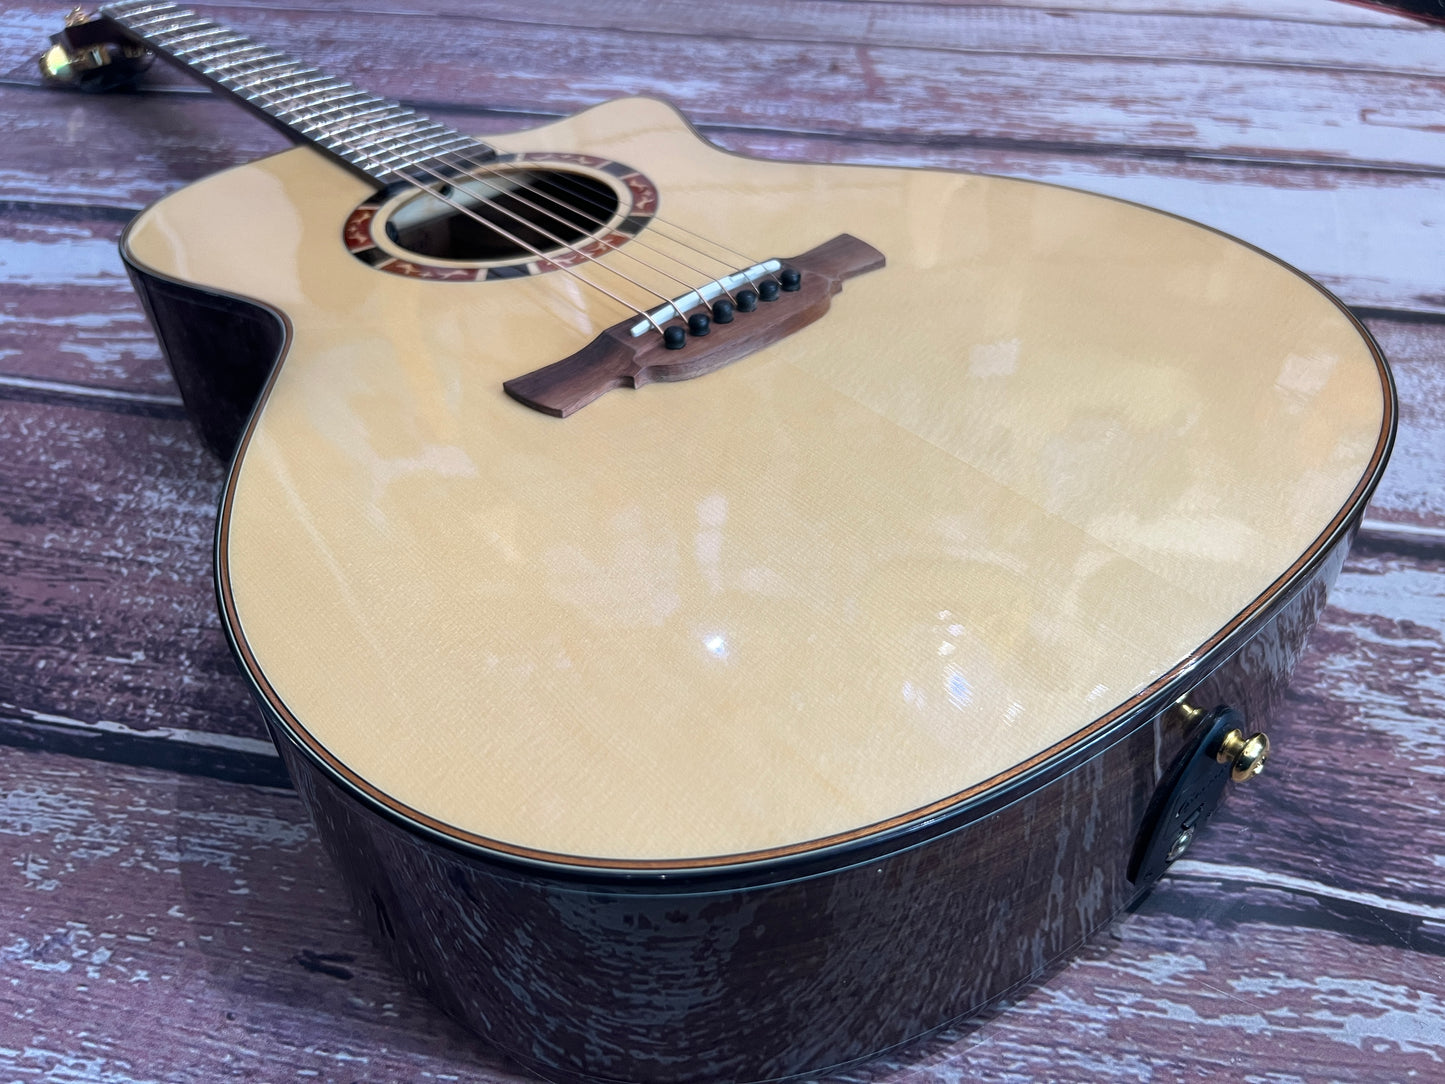 Crafter Stage STG T20 CE Pro Electro Acoustic